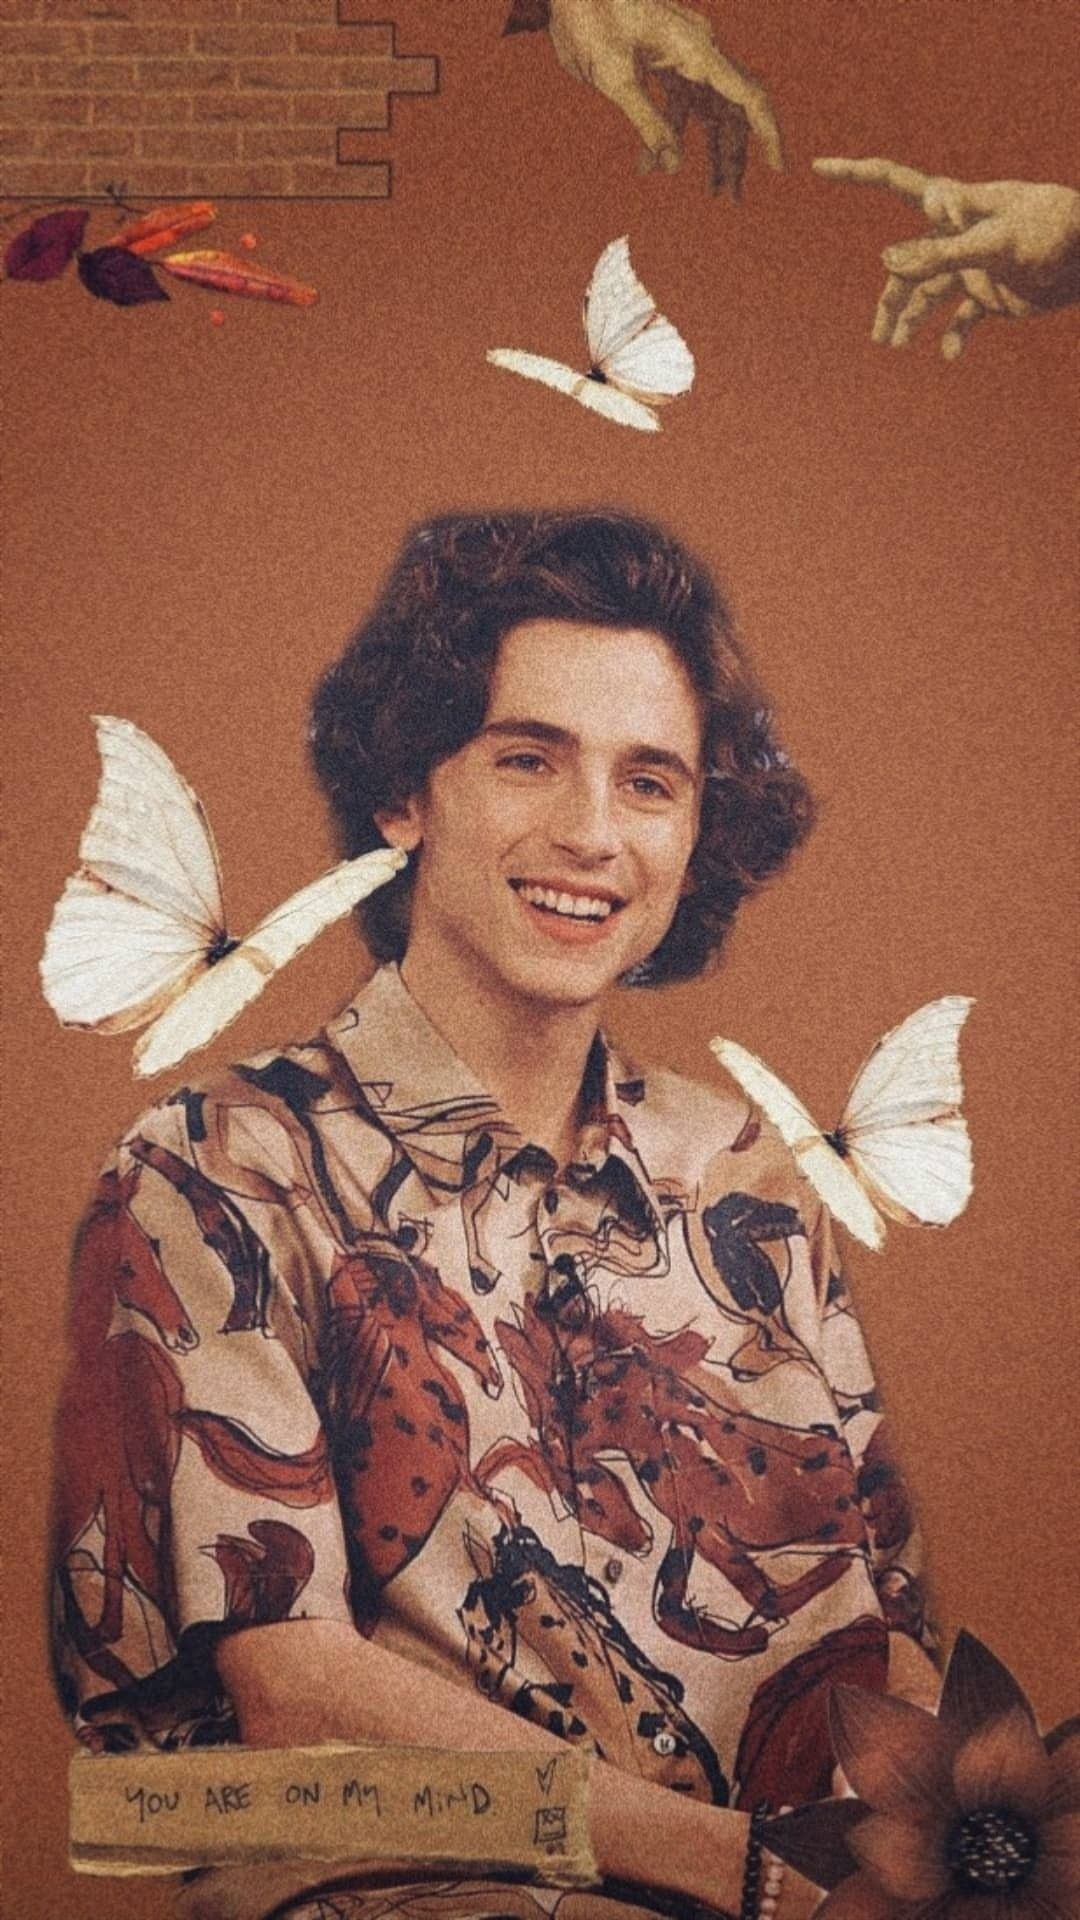 A man is smiling and holding his hands up - Timothee Chalamet